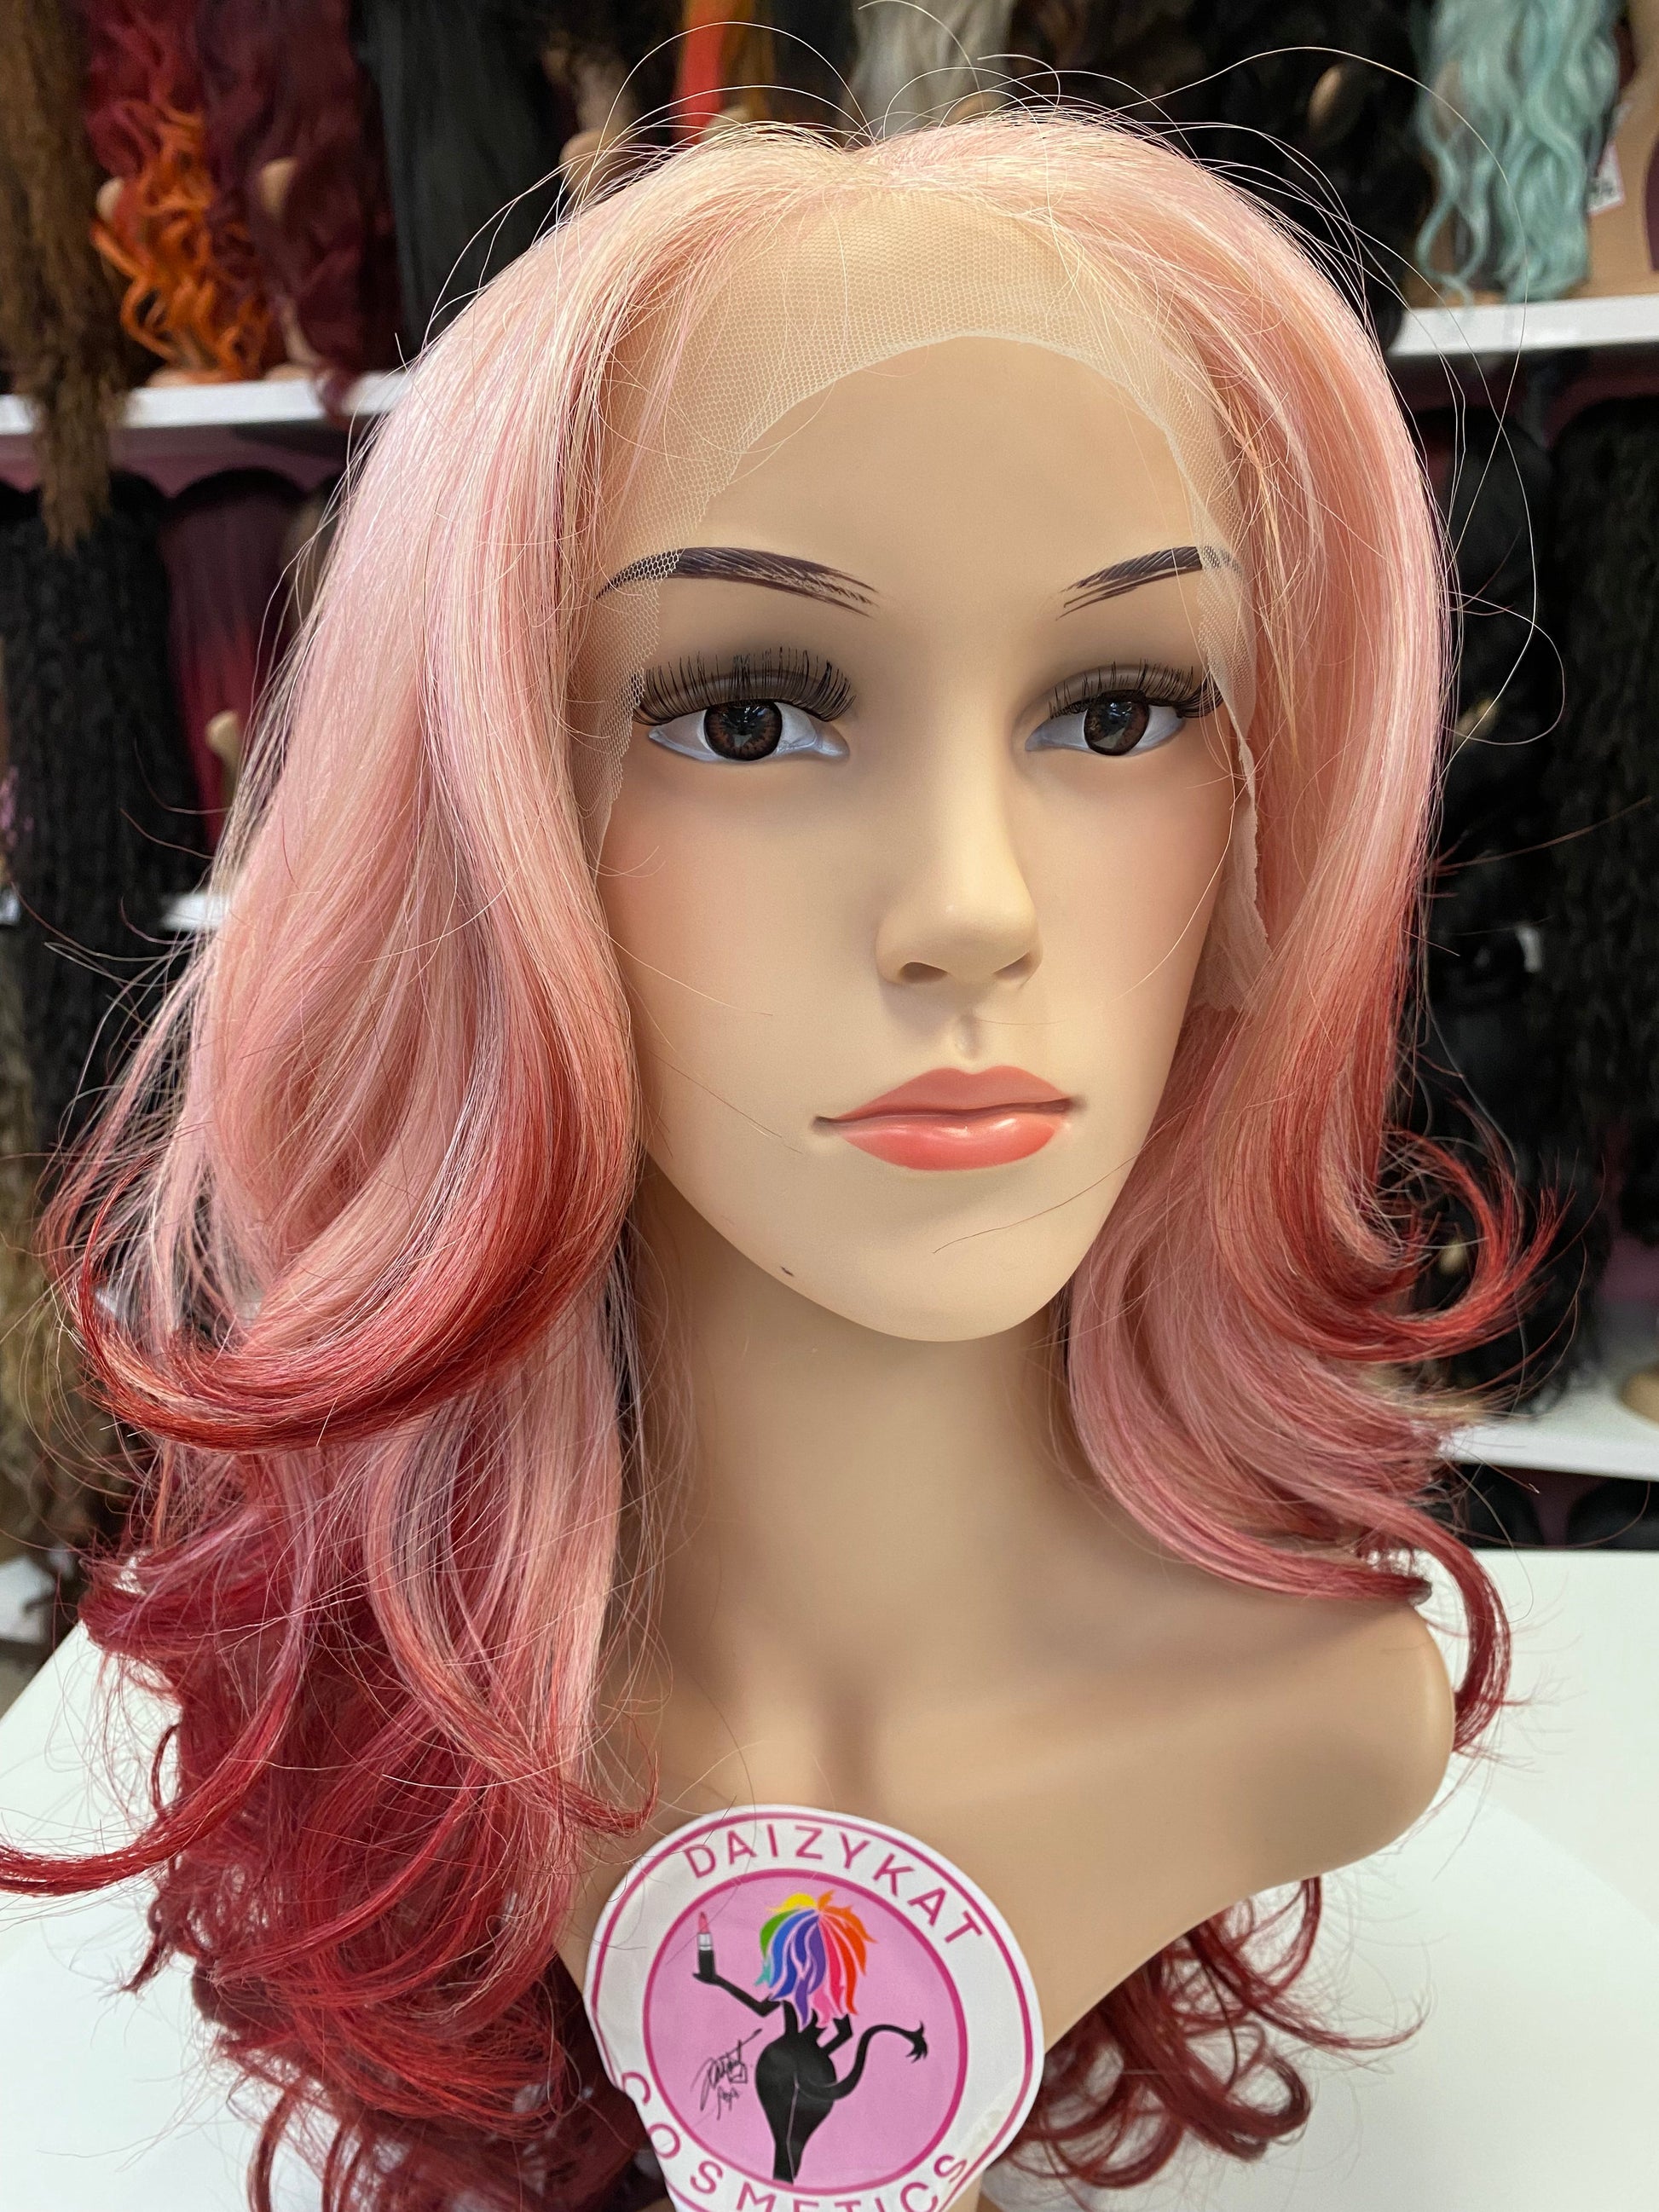 148 Riley - 13x4 Free Part Lace Front Wig - PINK TO RED - DaizyKat Cosmetics 148 Riley - 13x4 Free Part Lace Front Wig - PINK TO RED DaizyKat Cosmetics Wigs